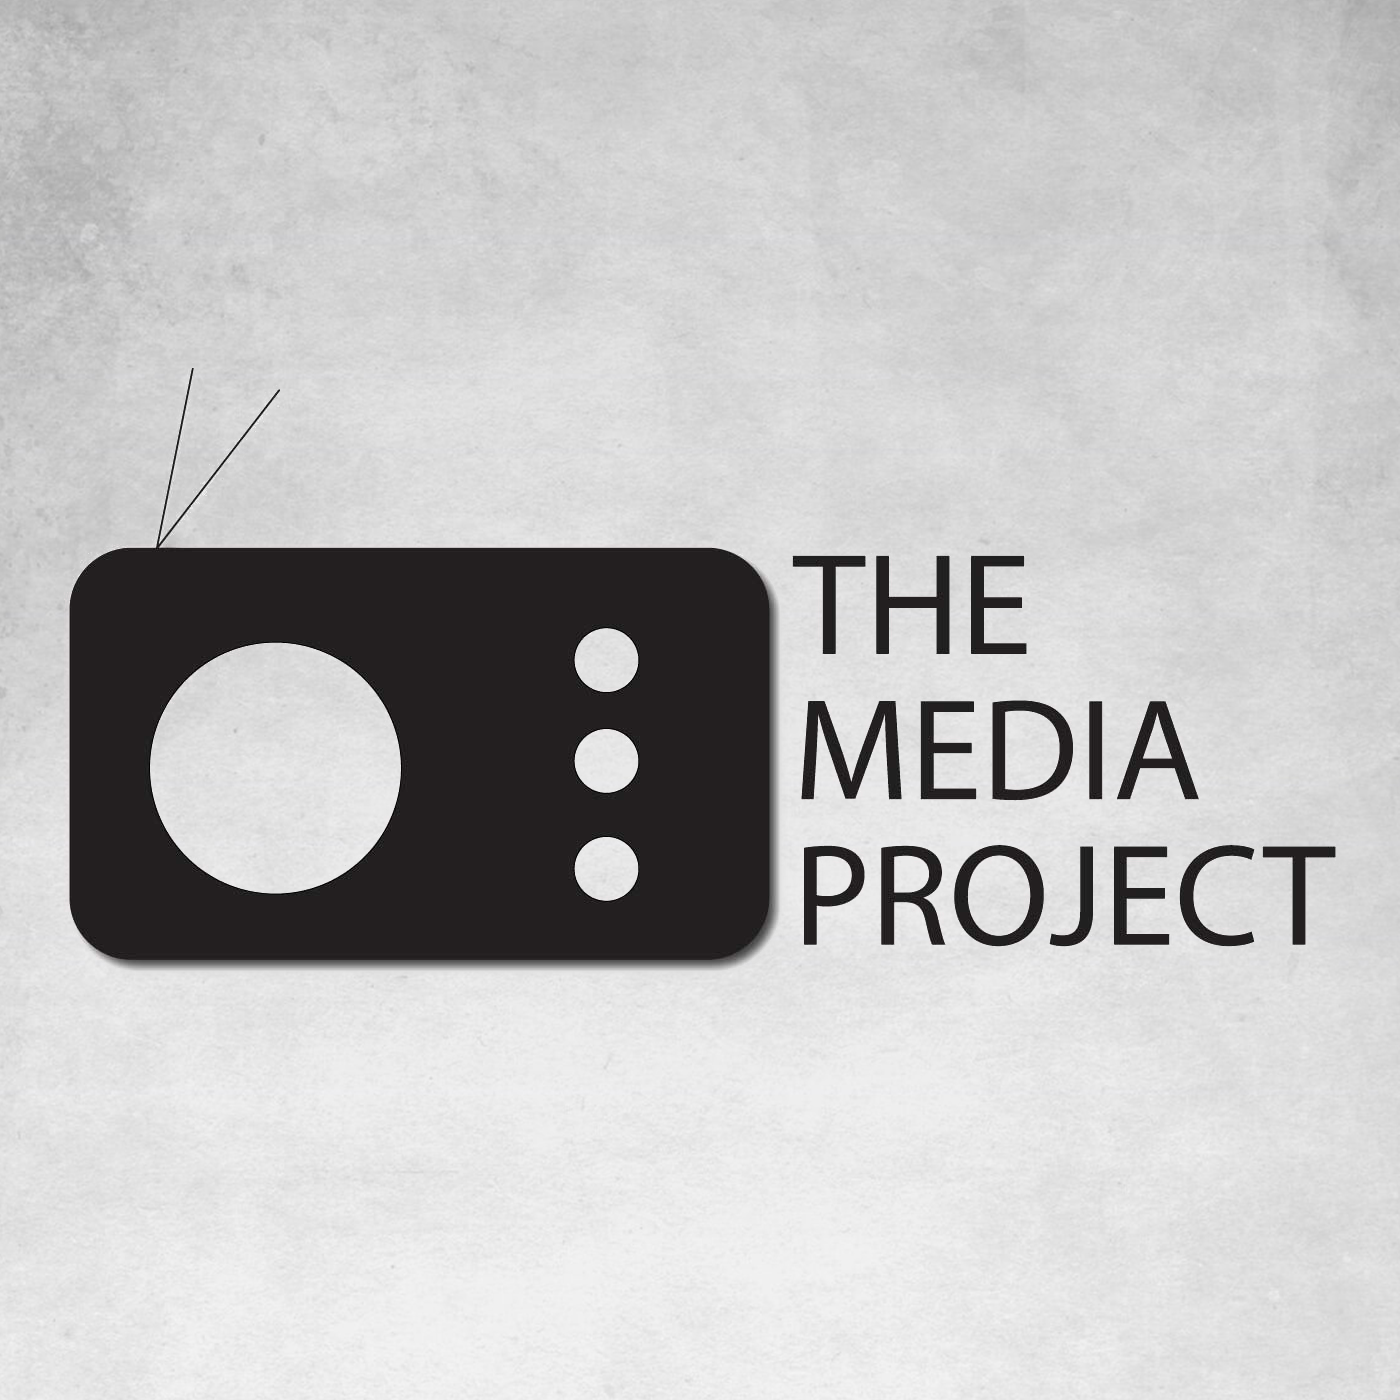 #1593: Decisions journalists must make and competition between news organizations | The Media Project